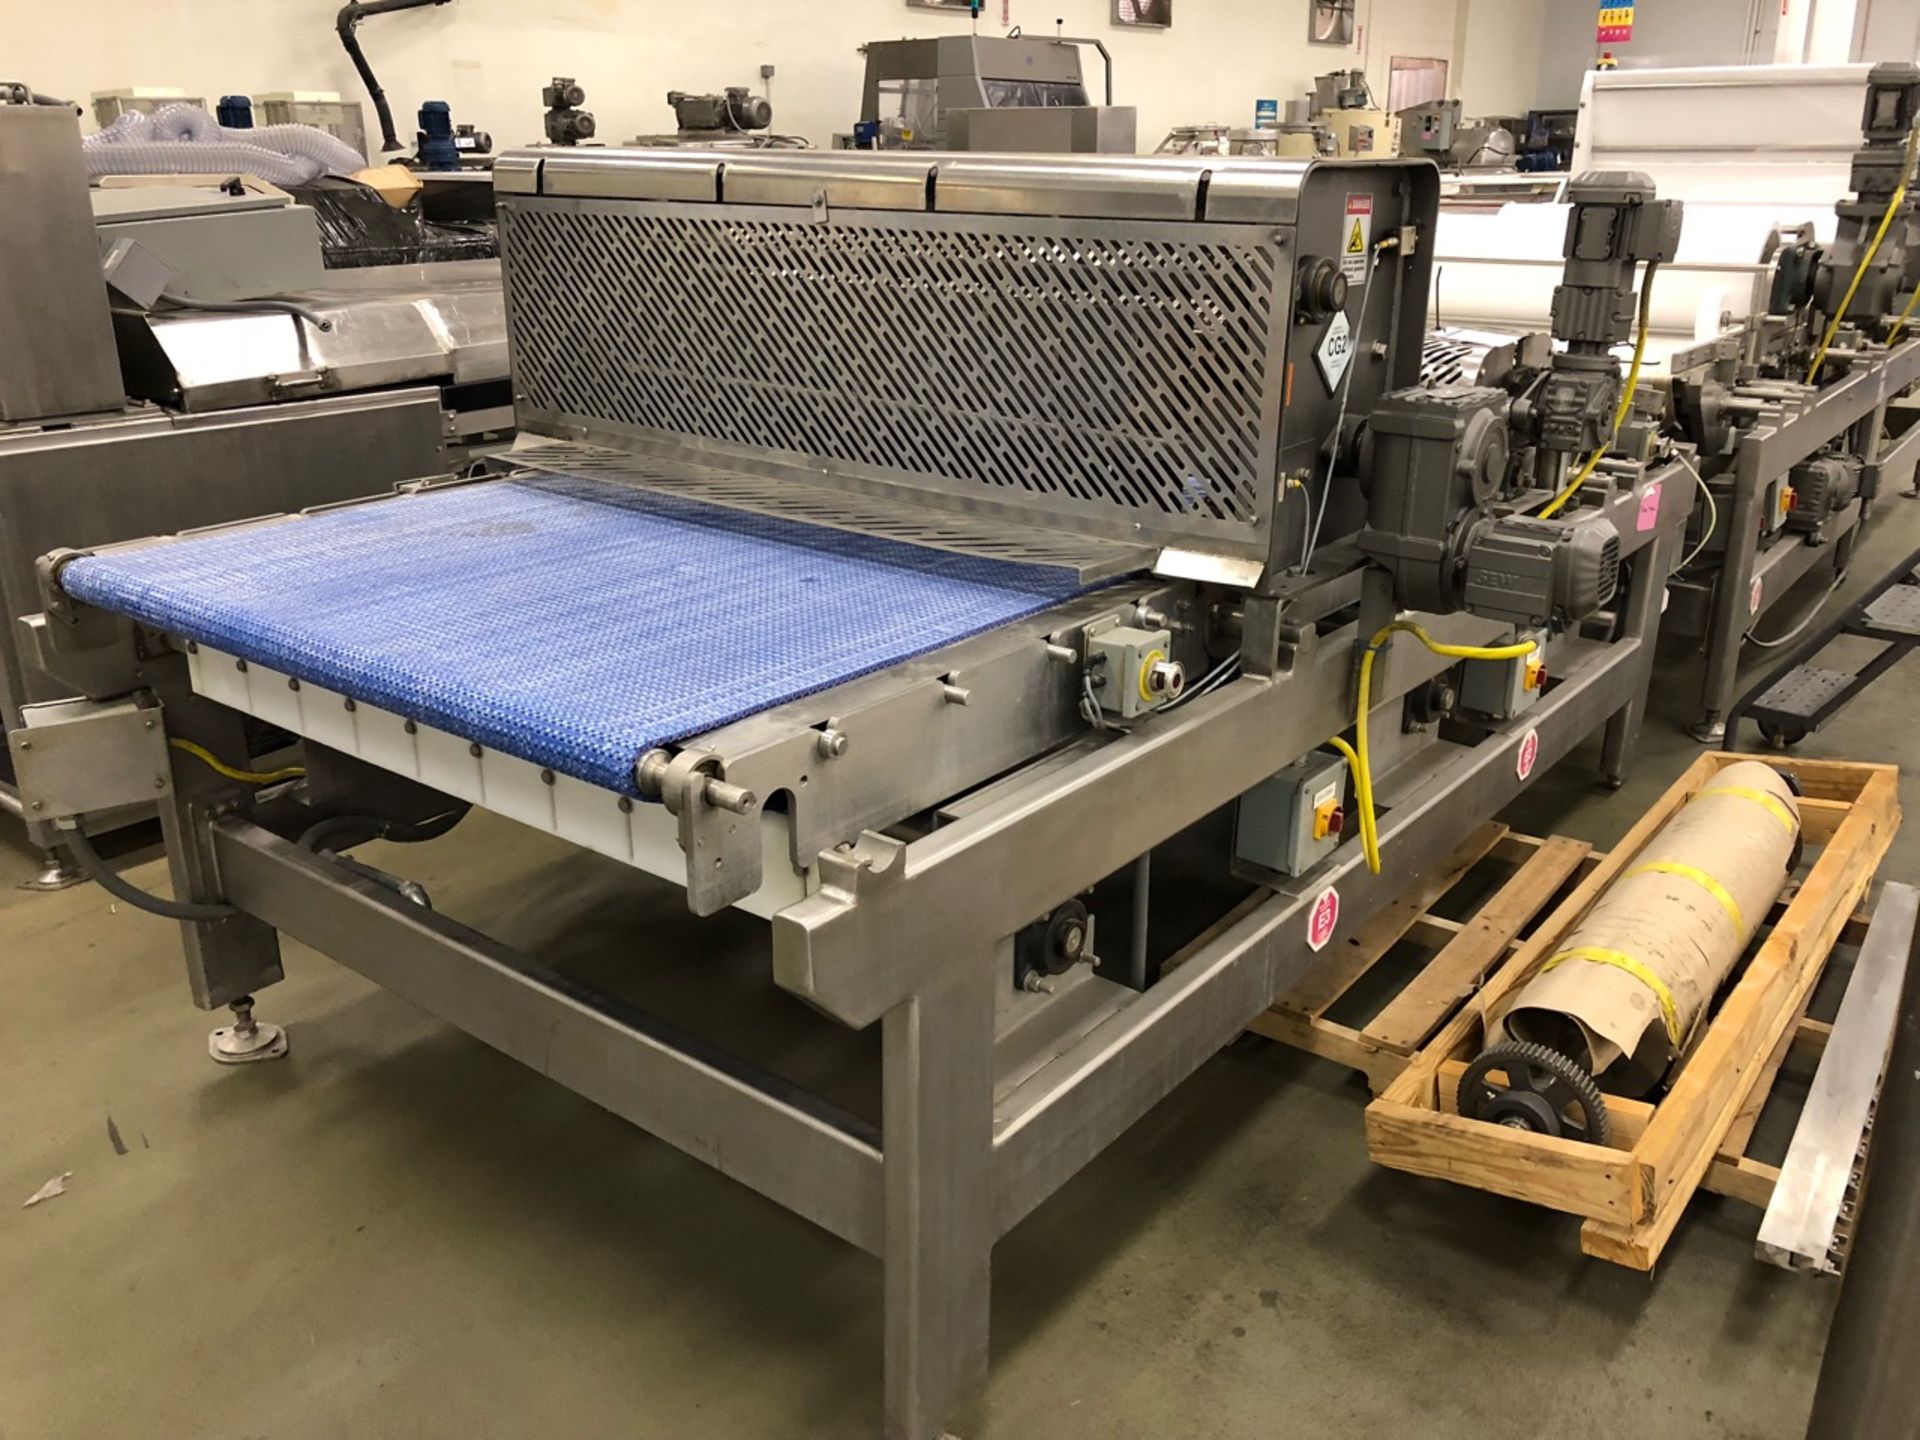 Slitter and Guillotine | Slitter and Guillotine | MODEL# N/A | SERIAL# N/A | * Skidding and load out